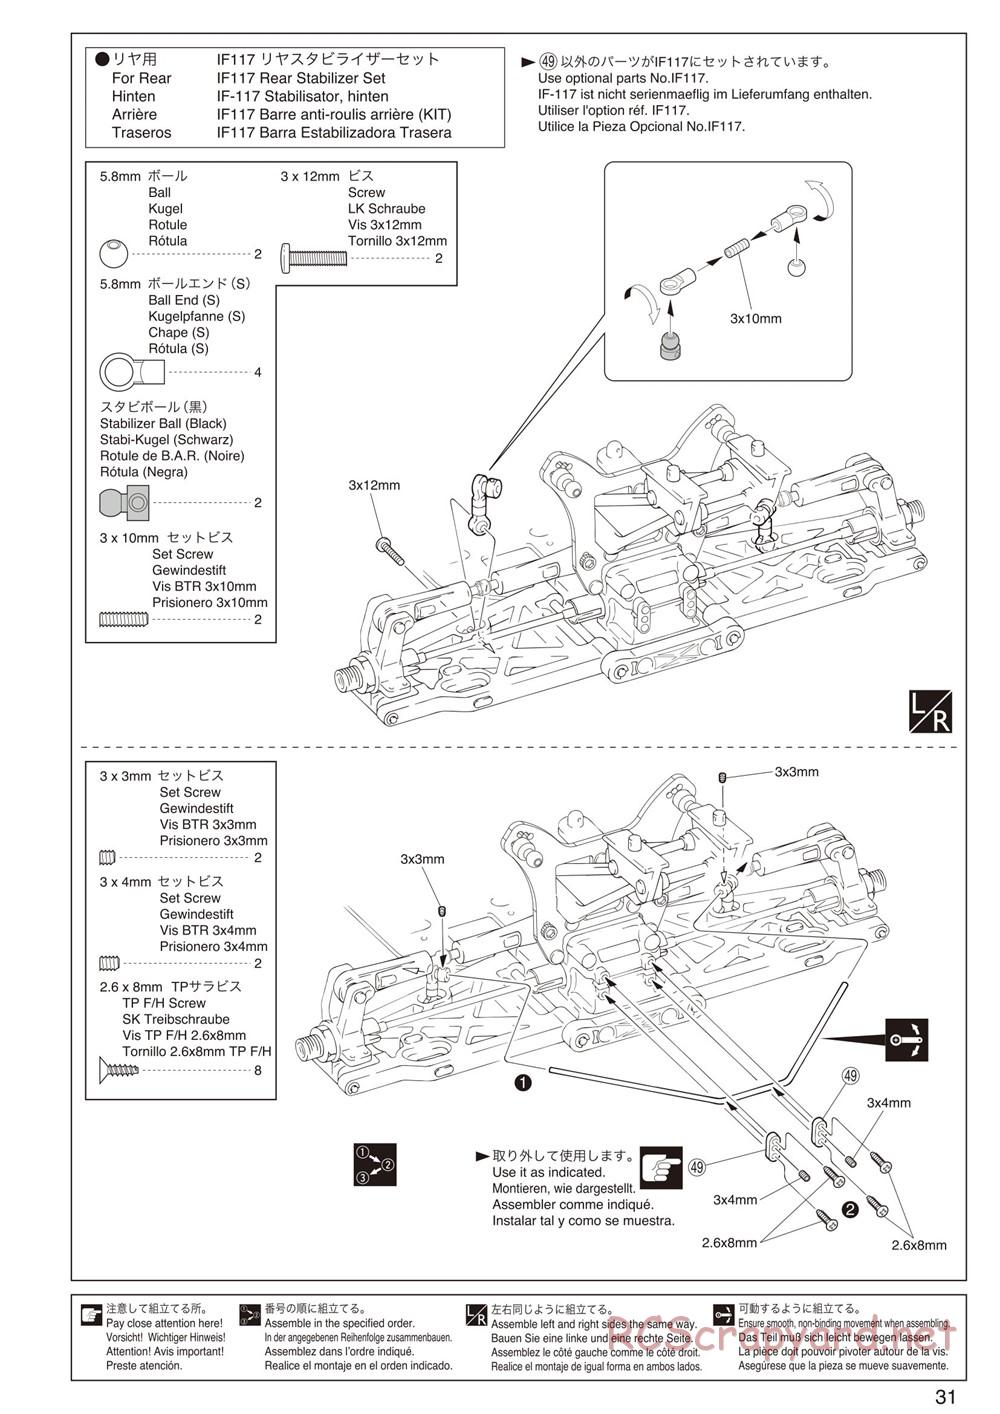 Kyosho - Inferno Neo 2.0 - Manual - Page 31